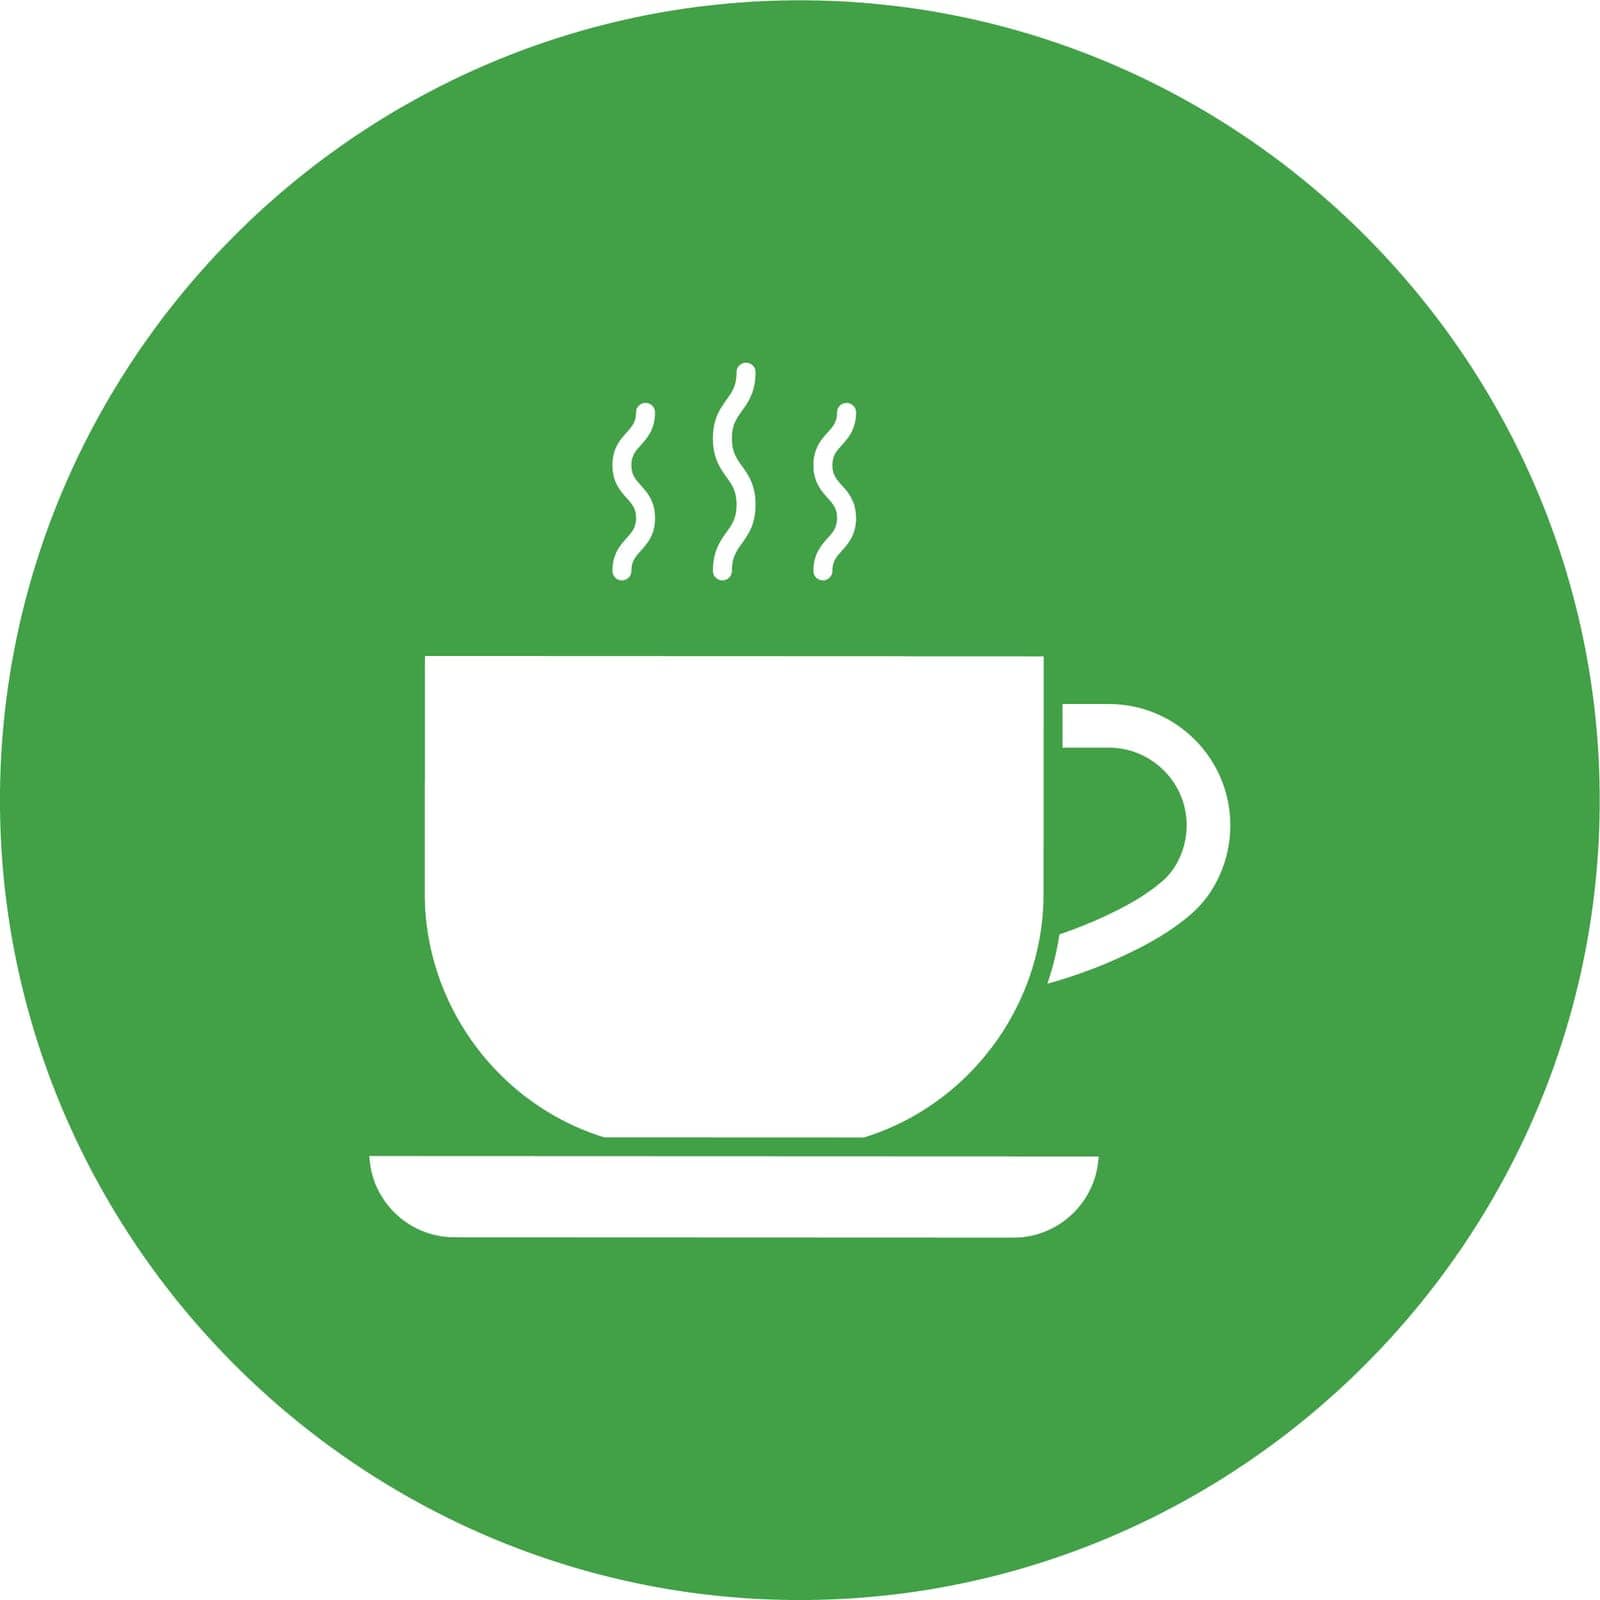 Hot Beverage icon vector image. Suitable for mobile application web application and print media.